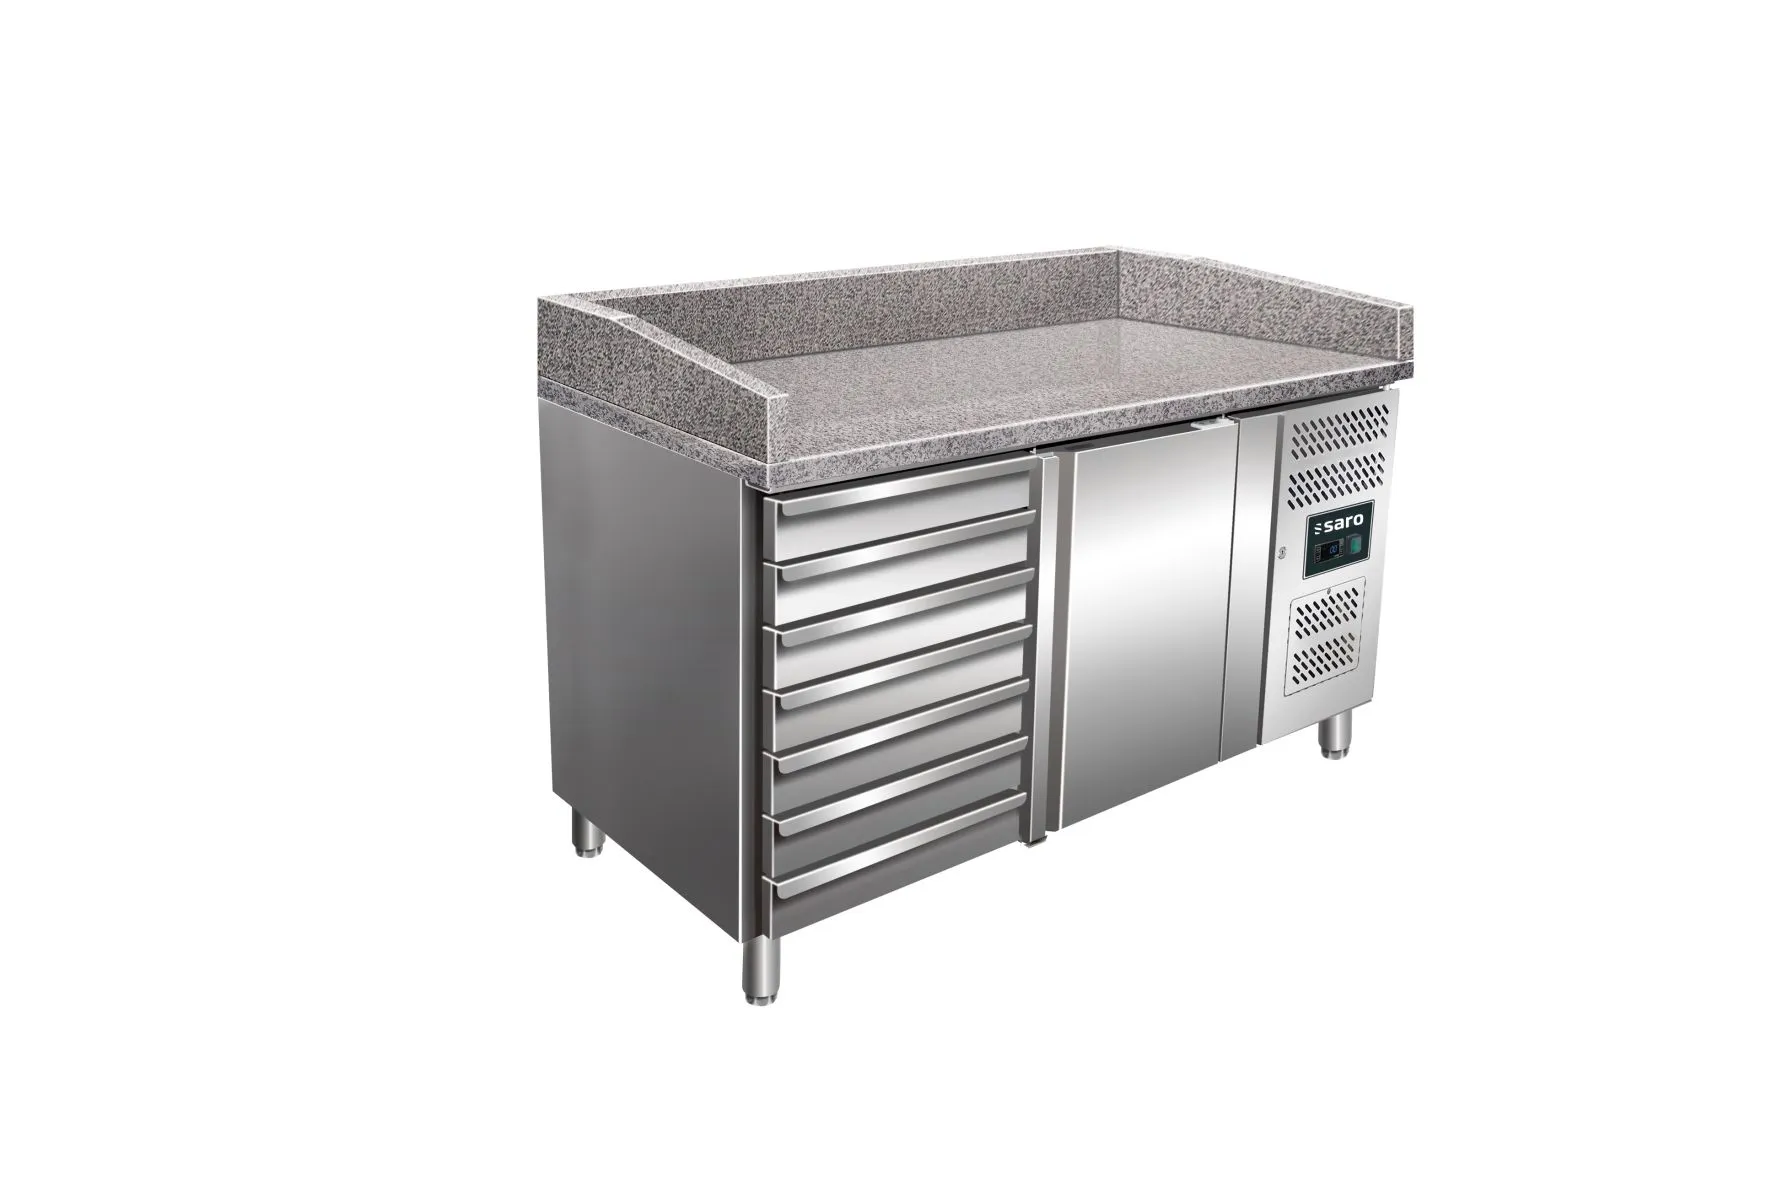 Saro Pizza preparation table with drawers Model MARGA P